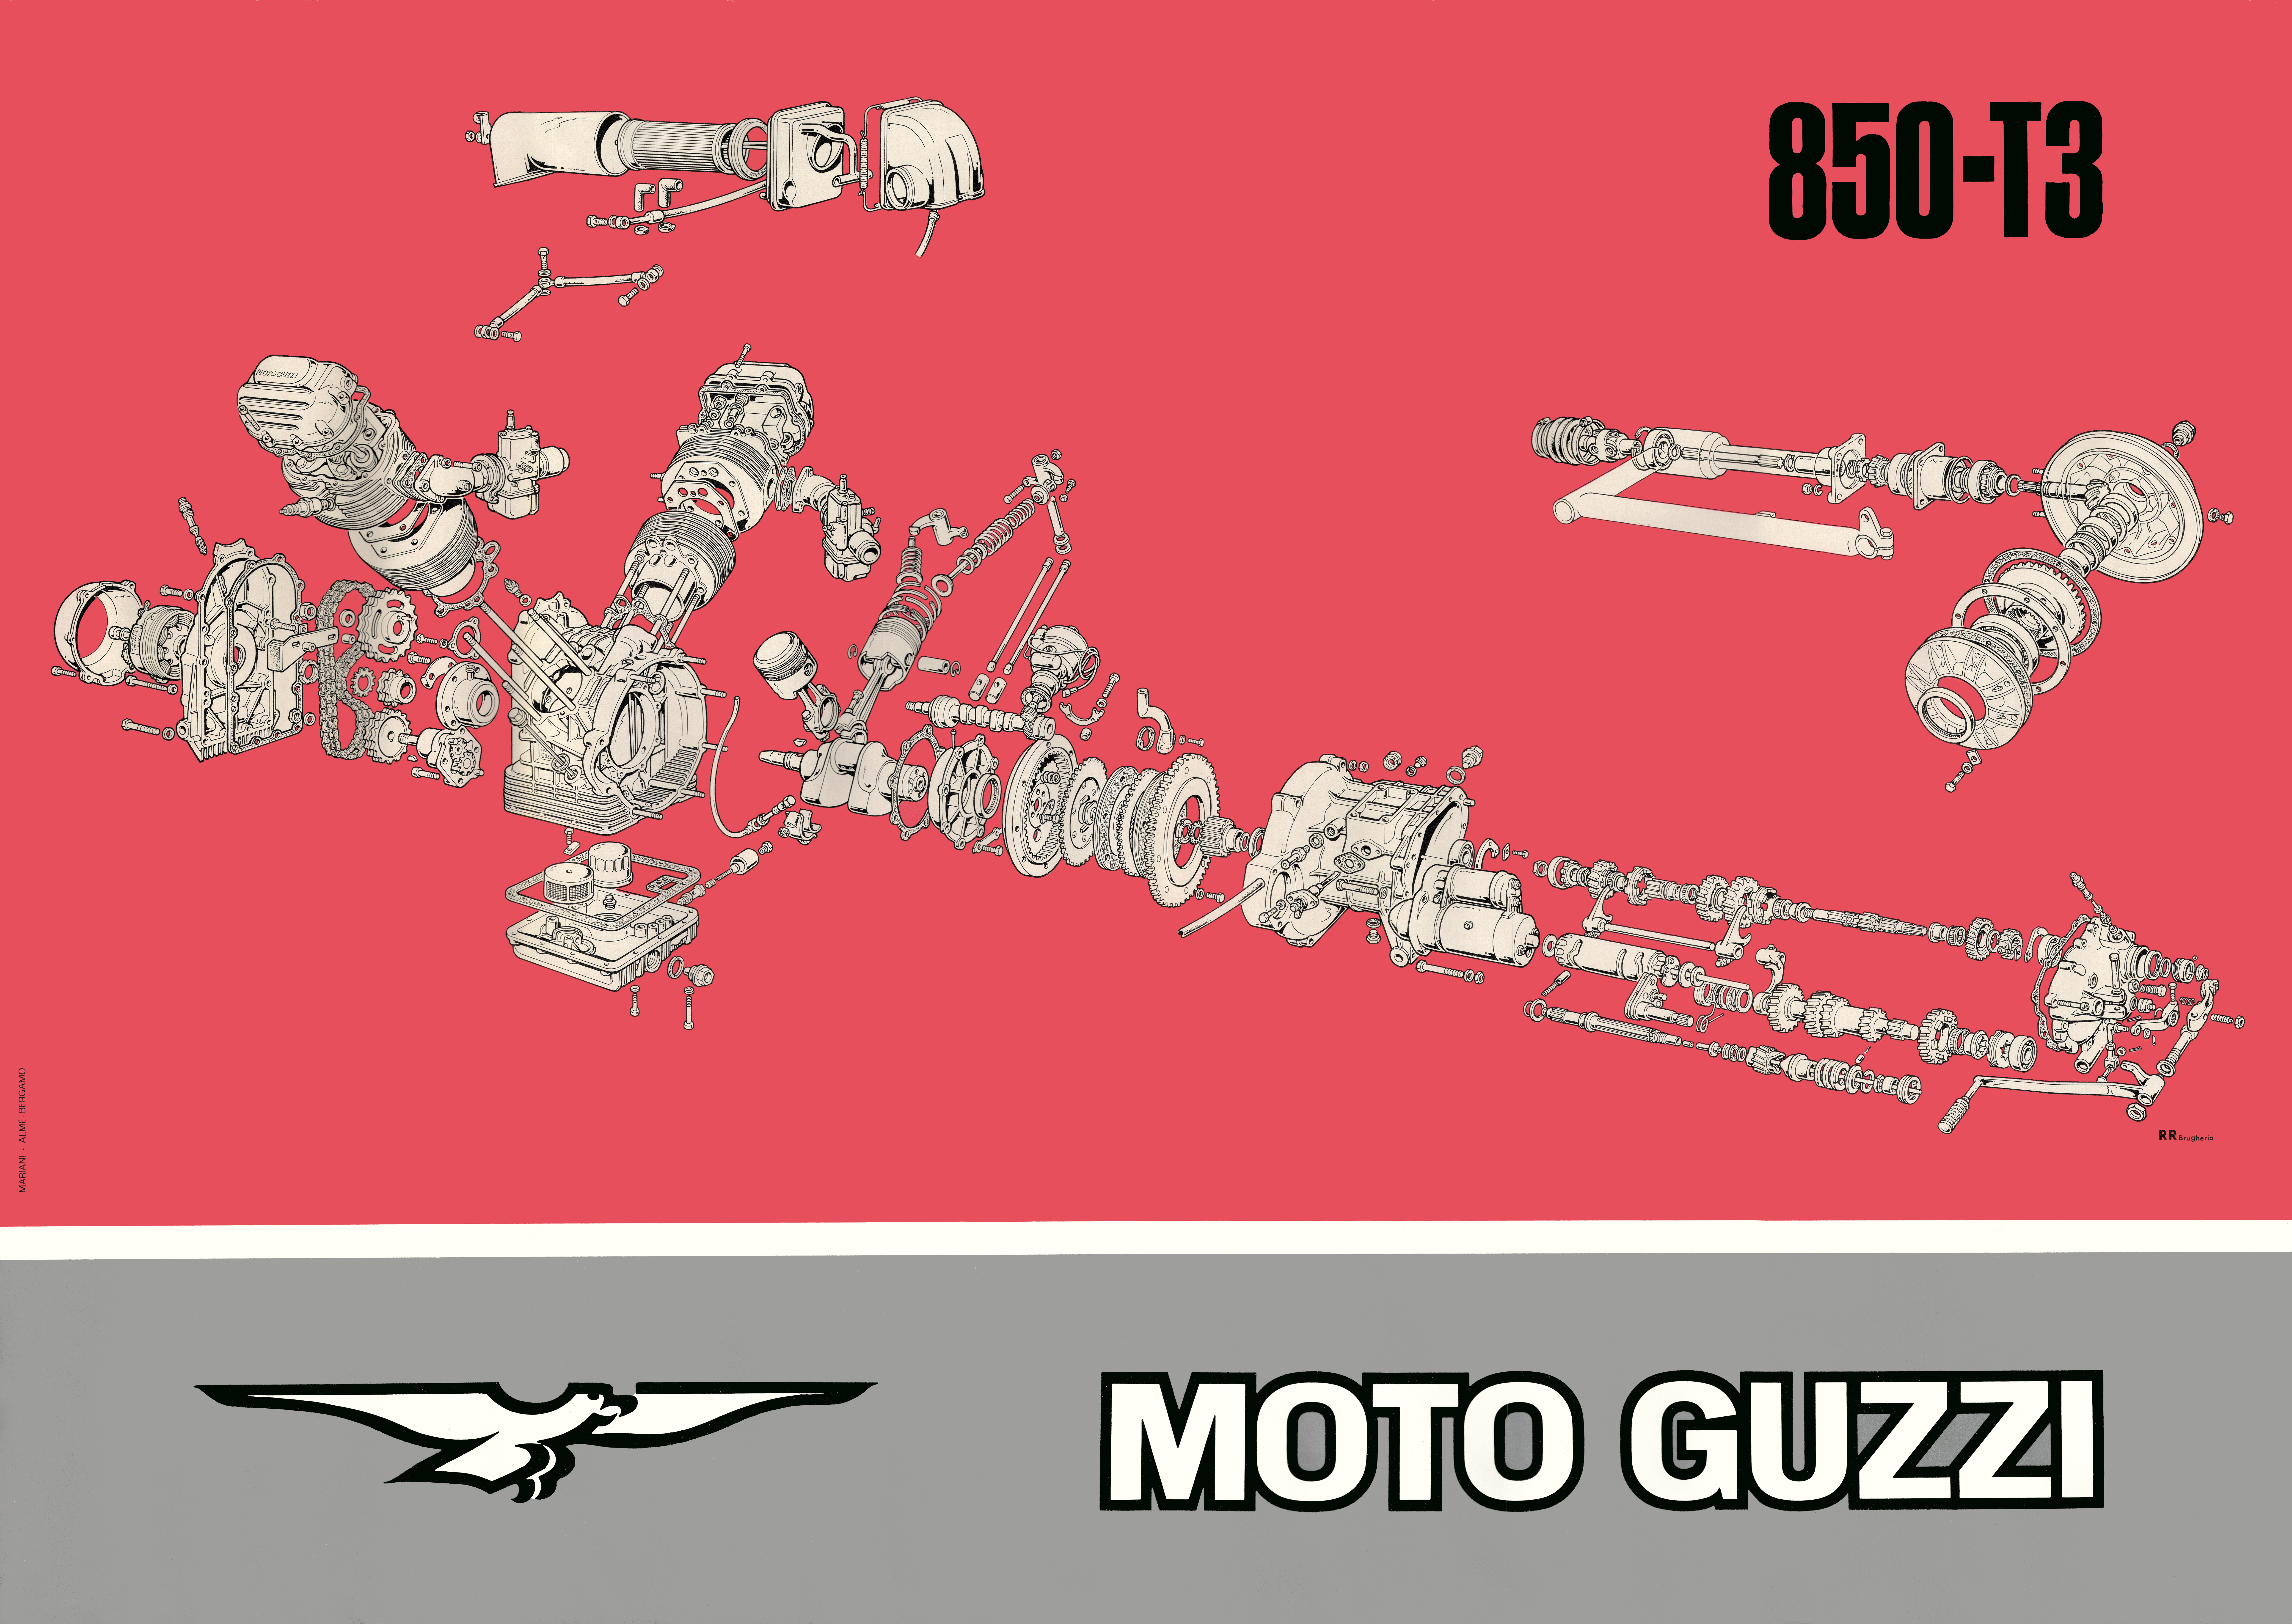 Poster - Exploded view of the Moto Guzzi 850 T3 engine, transmission, and rear drive (cleaned scan).